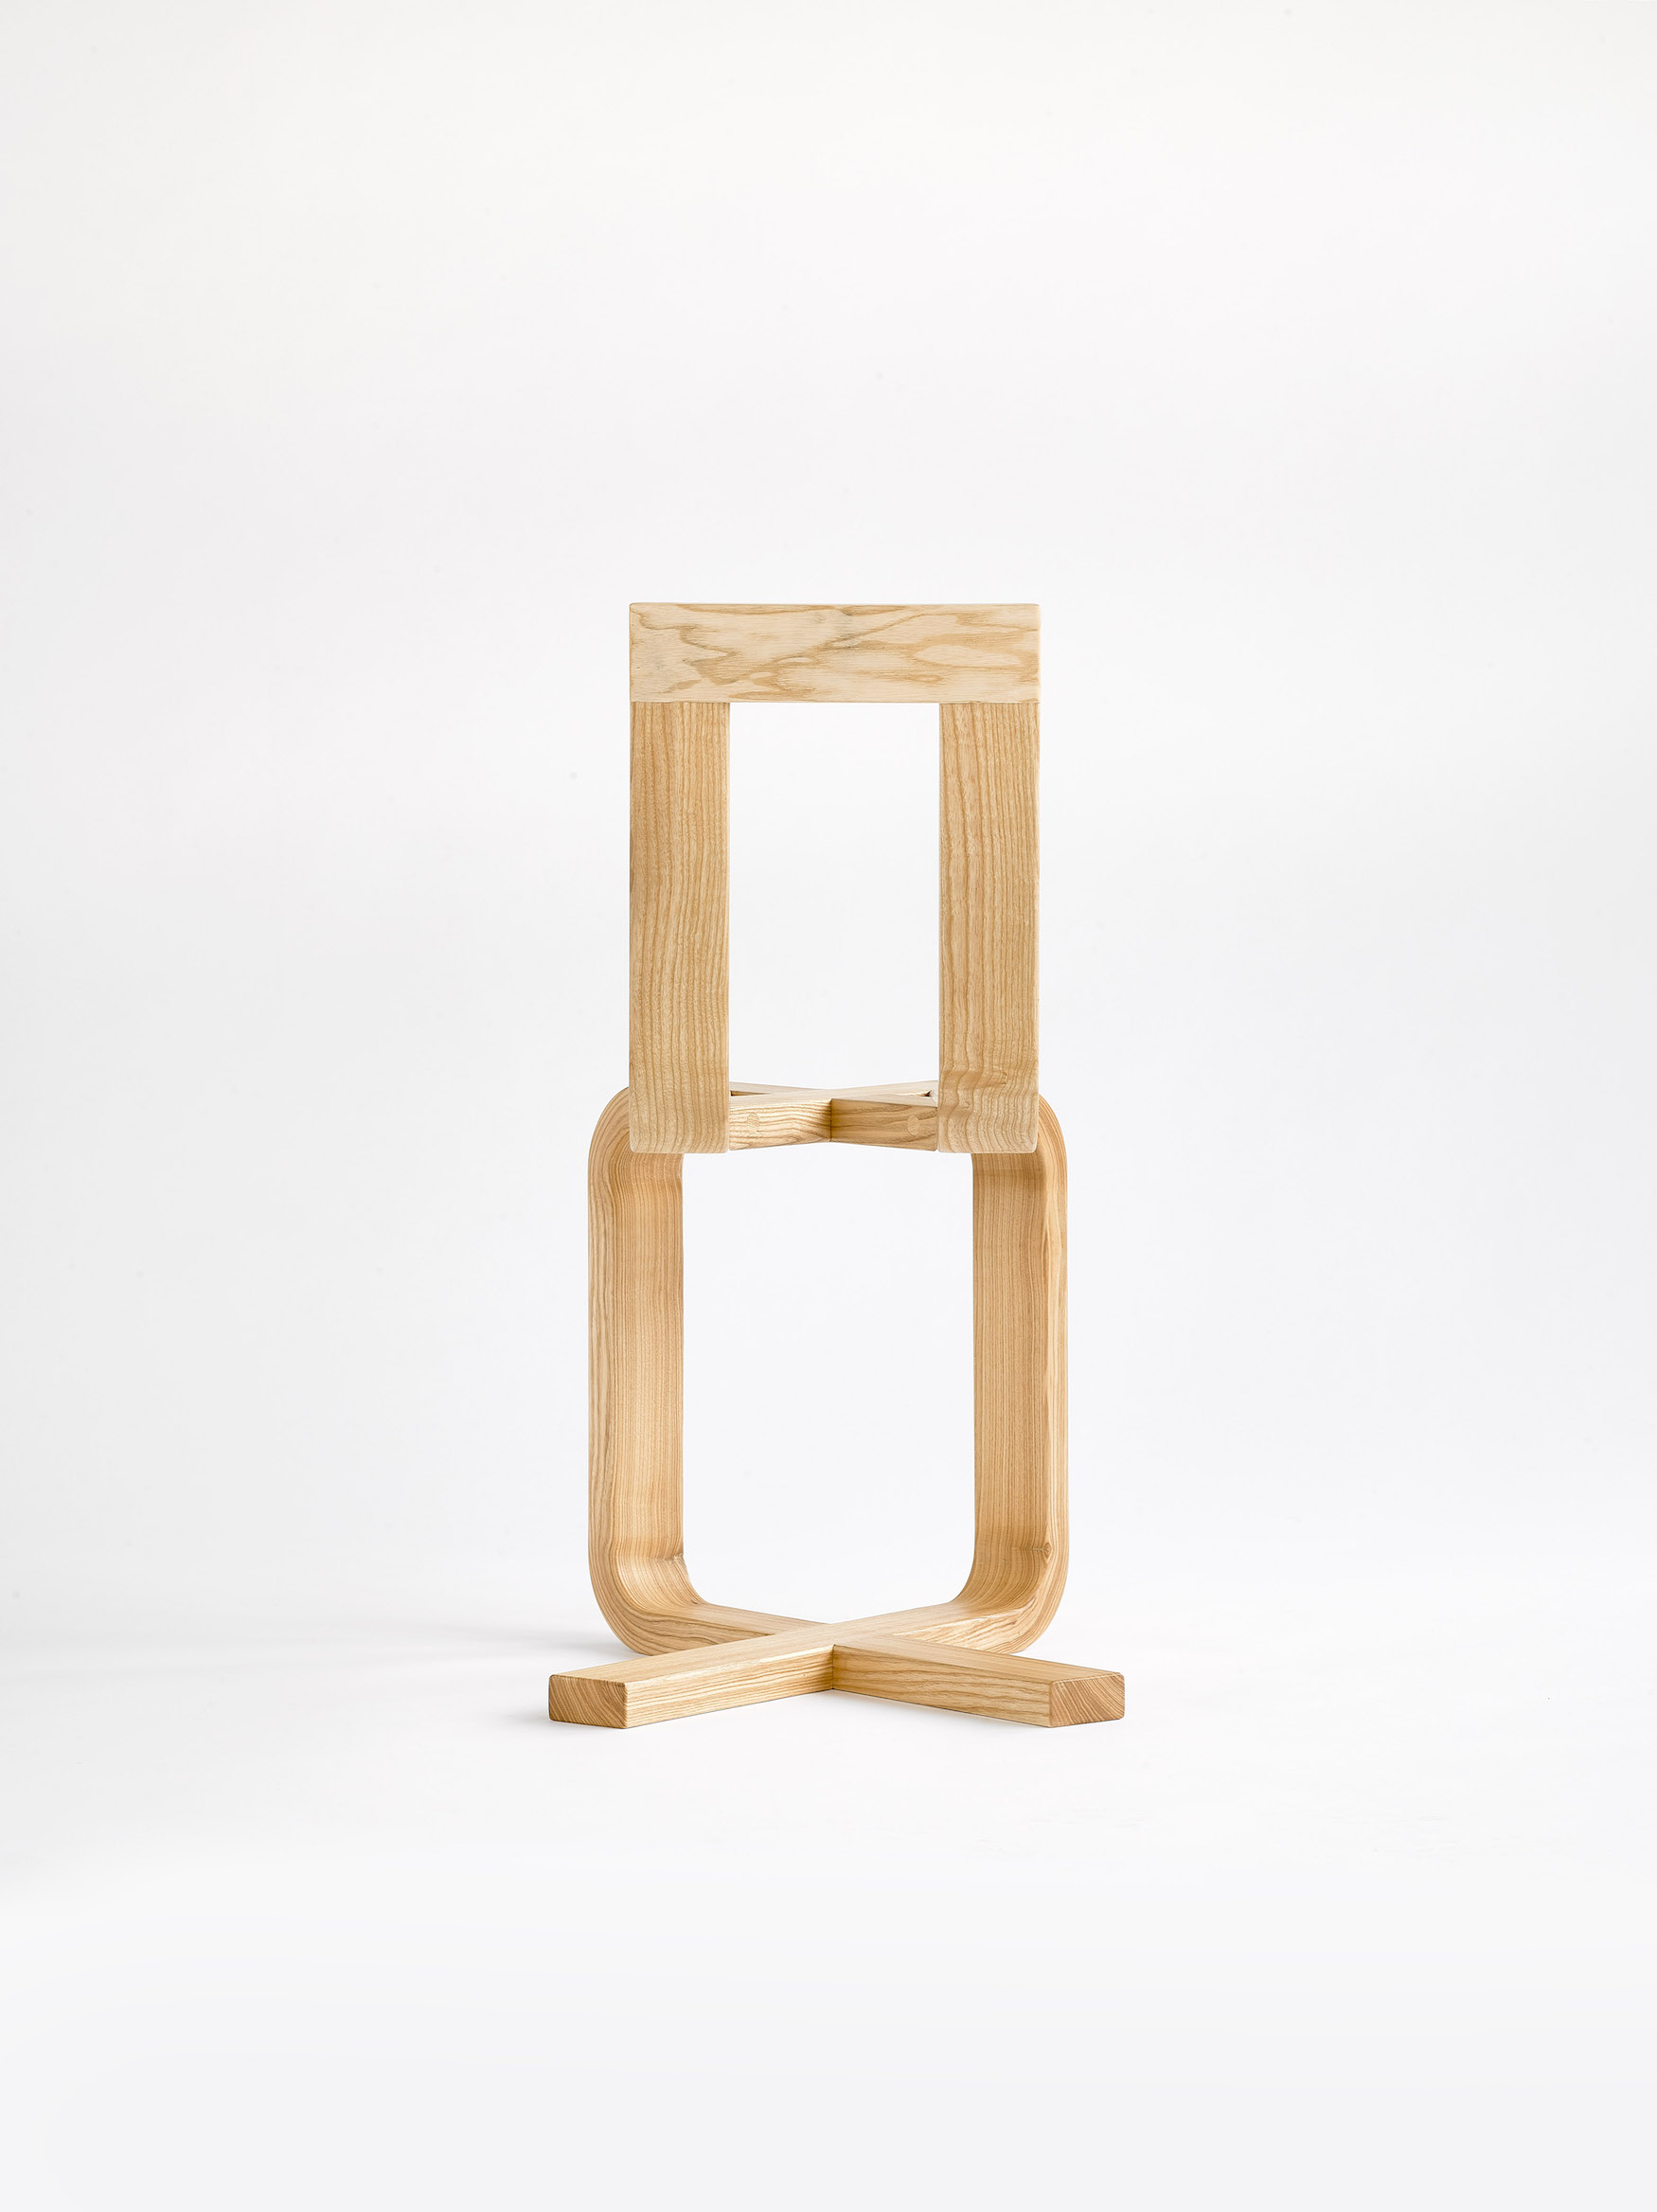 LCX Chair by Florian Hauswirth for Winkler